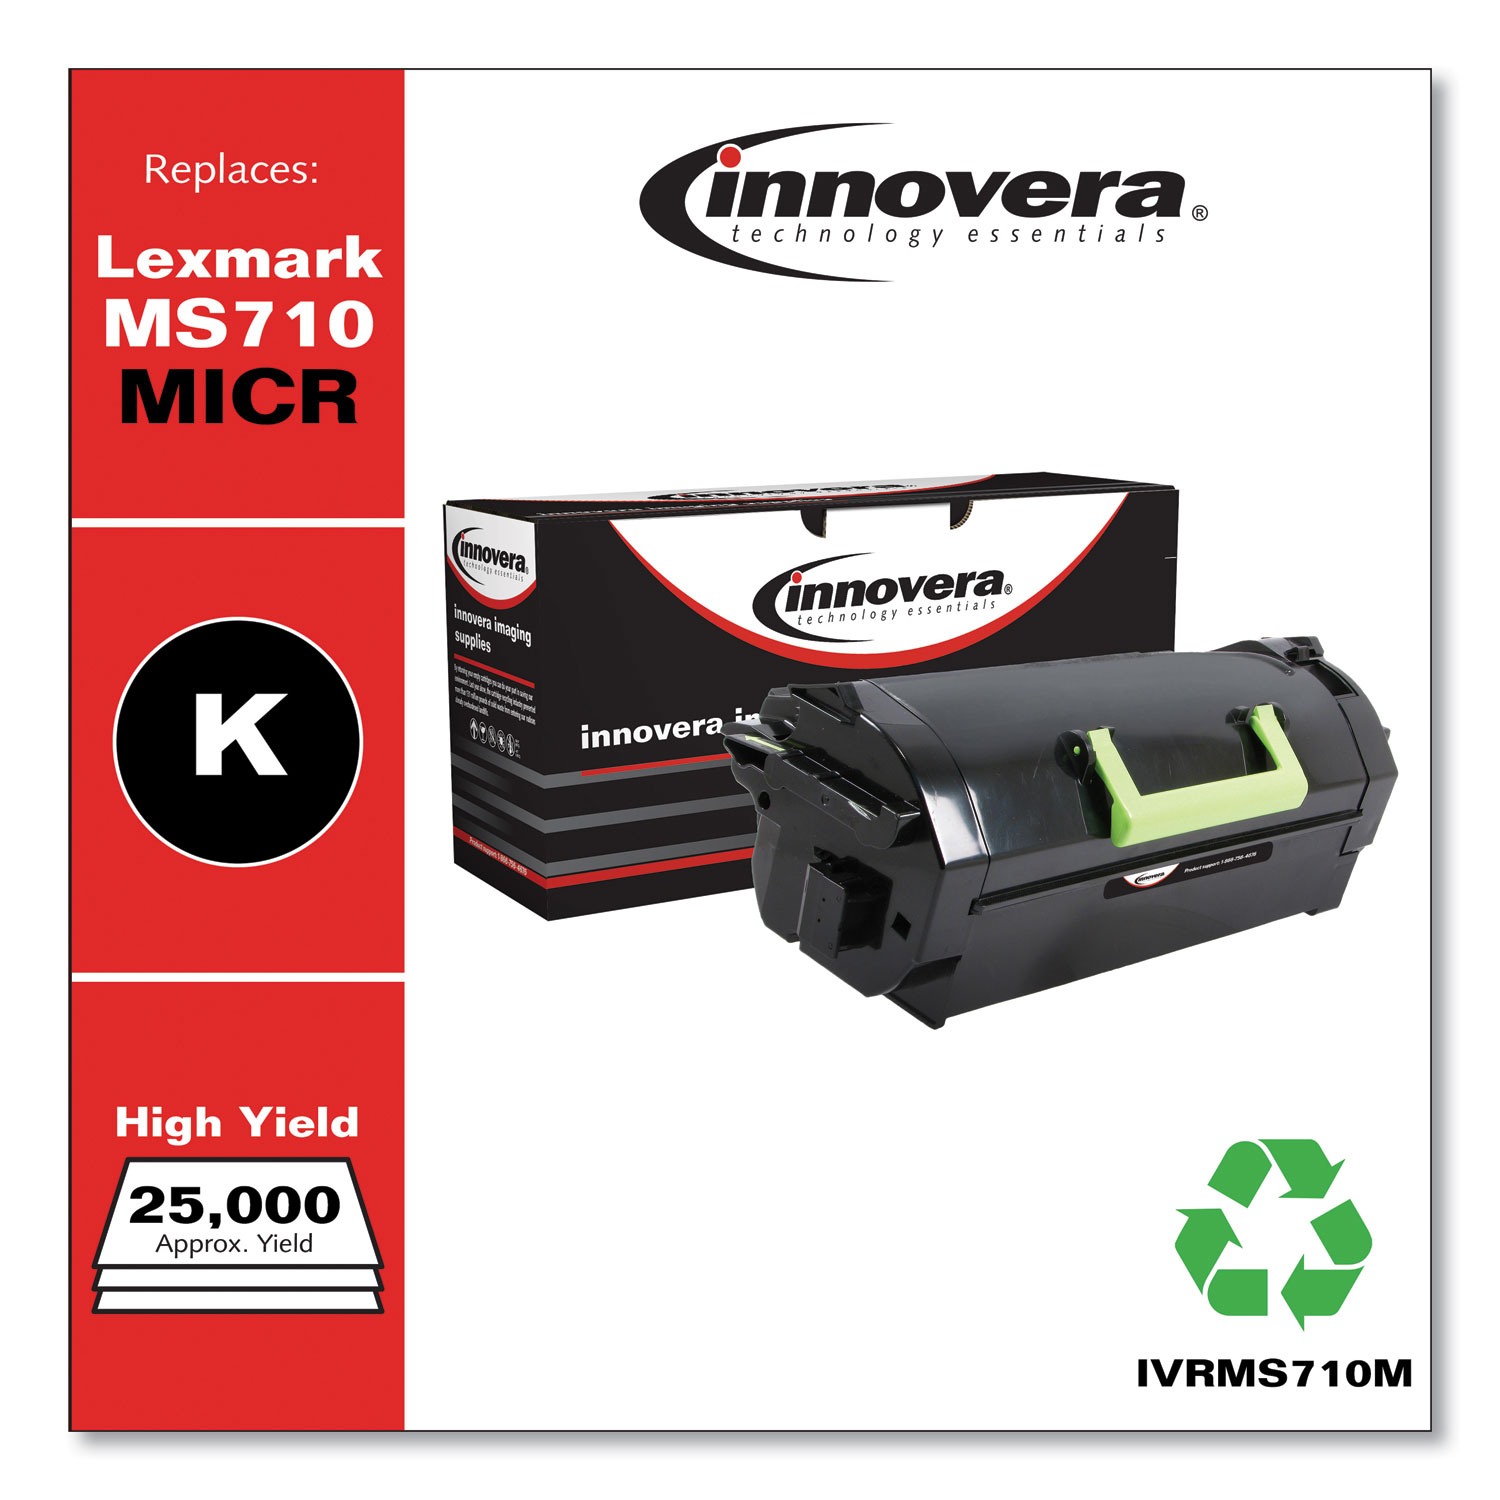  Innovera IVRMS710M Remanufactured 52D0HA0 (MS710M) High-Yield MICR Toner, 25000 Page-Yield, Black (IVRMS710M) 